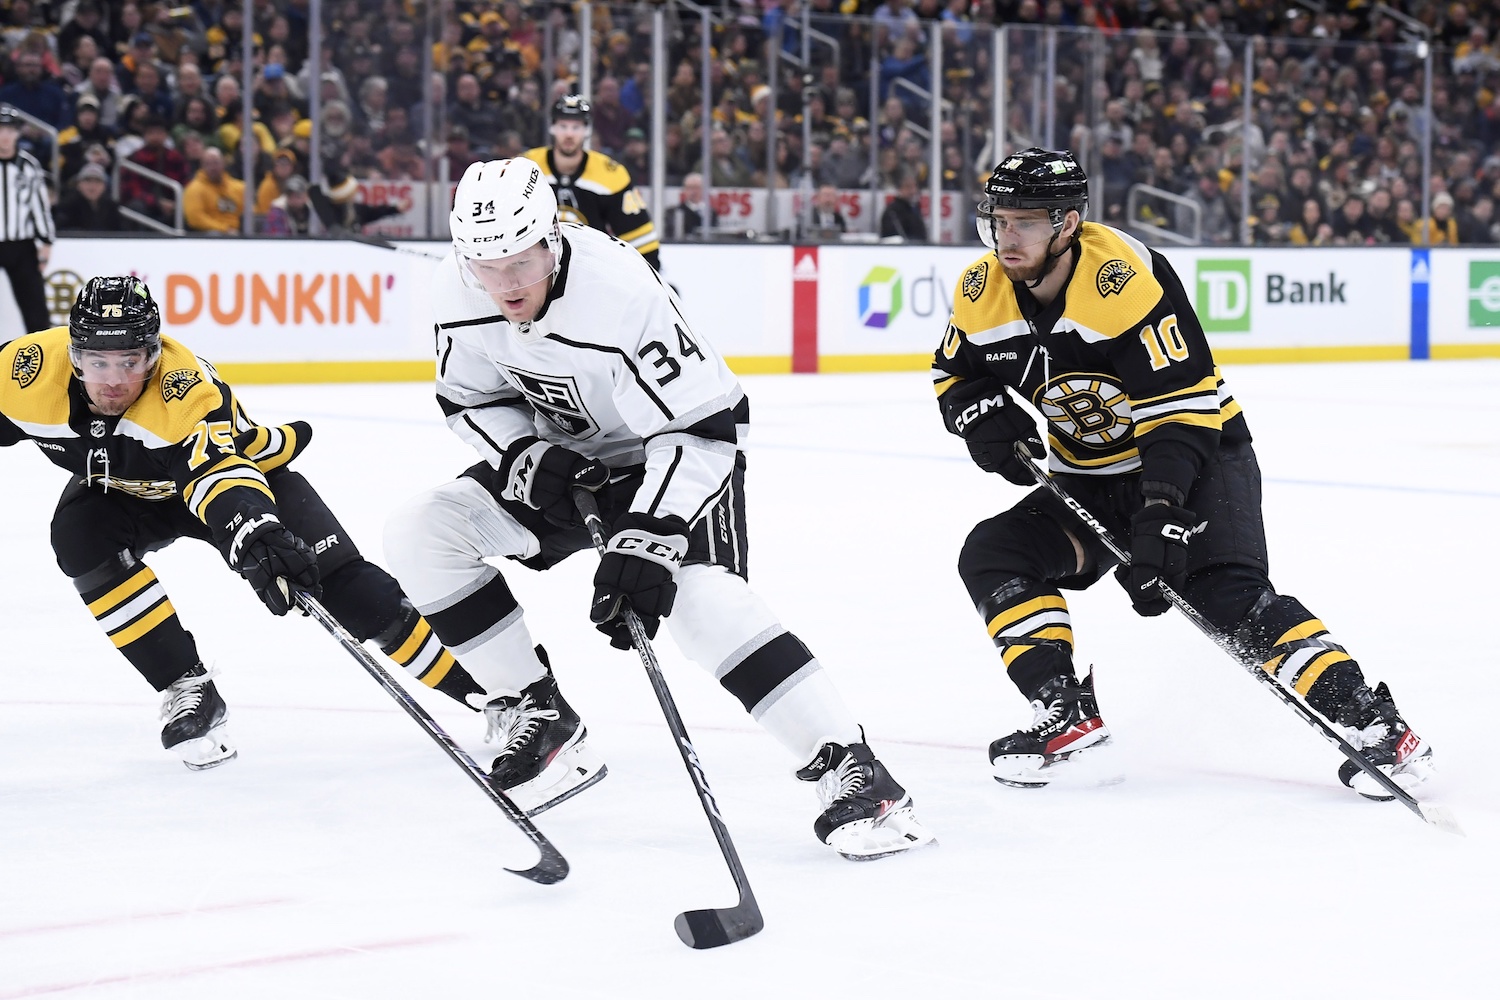 Dec 15, 2022; Boston, Massachusetts, USA;  Los Angeles Kings right wing Arthur Kaliyev (34) controls the puck between Boston Bruins defenseman Connor Clifton (75) and left wing A.J. Greer (10) during the second period at TD Garden. Mandatory Credit: Bob DeChiara/USA TODAY Sports